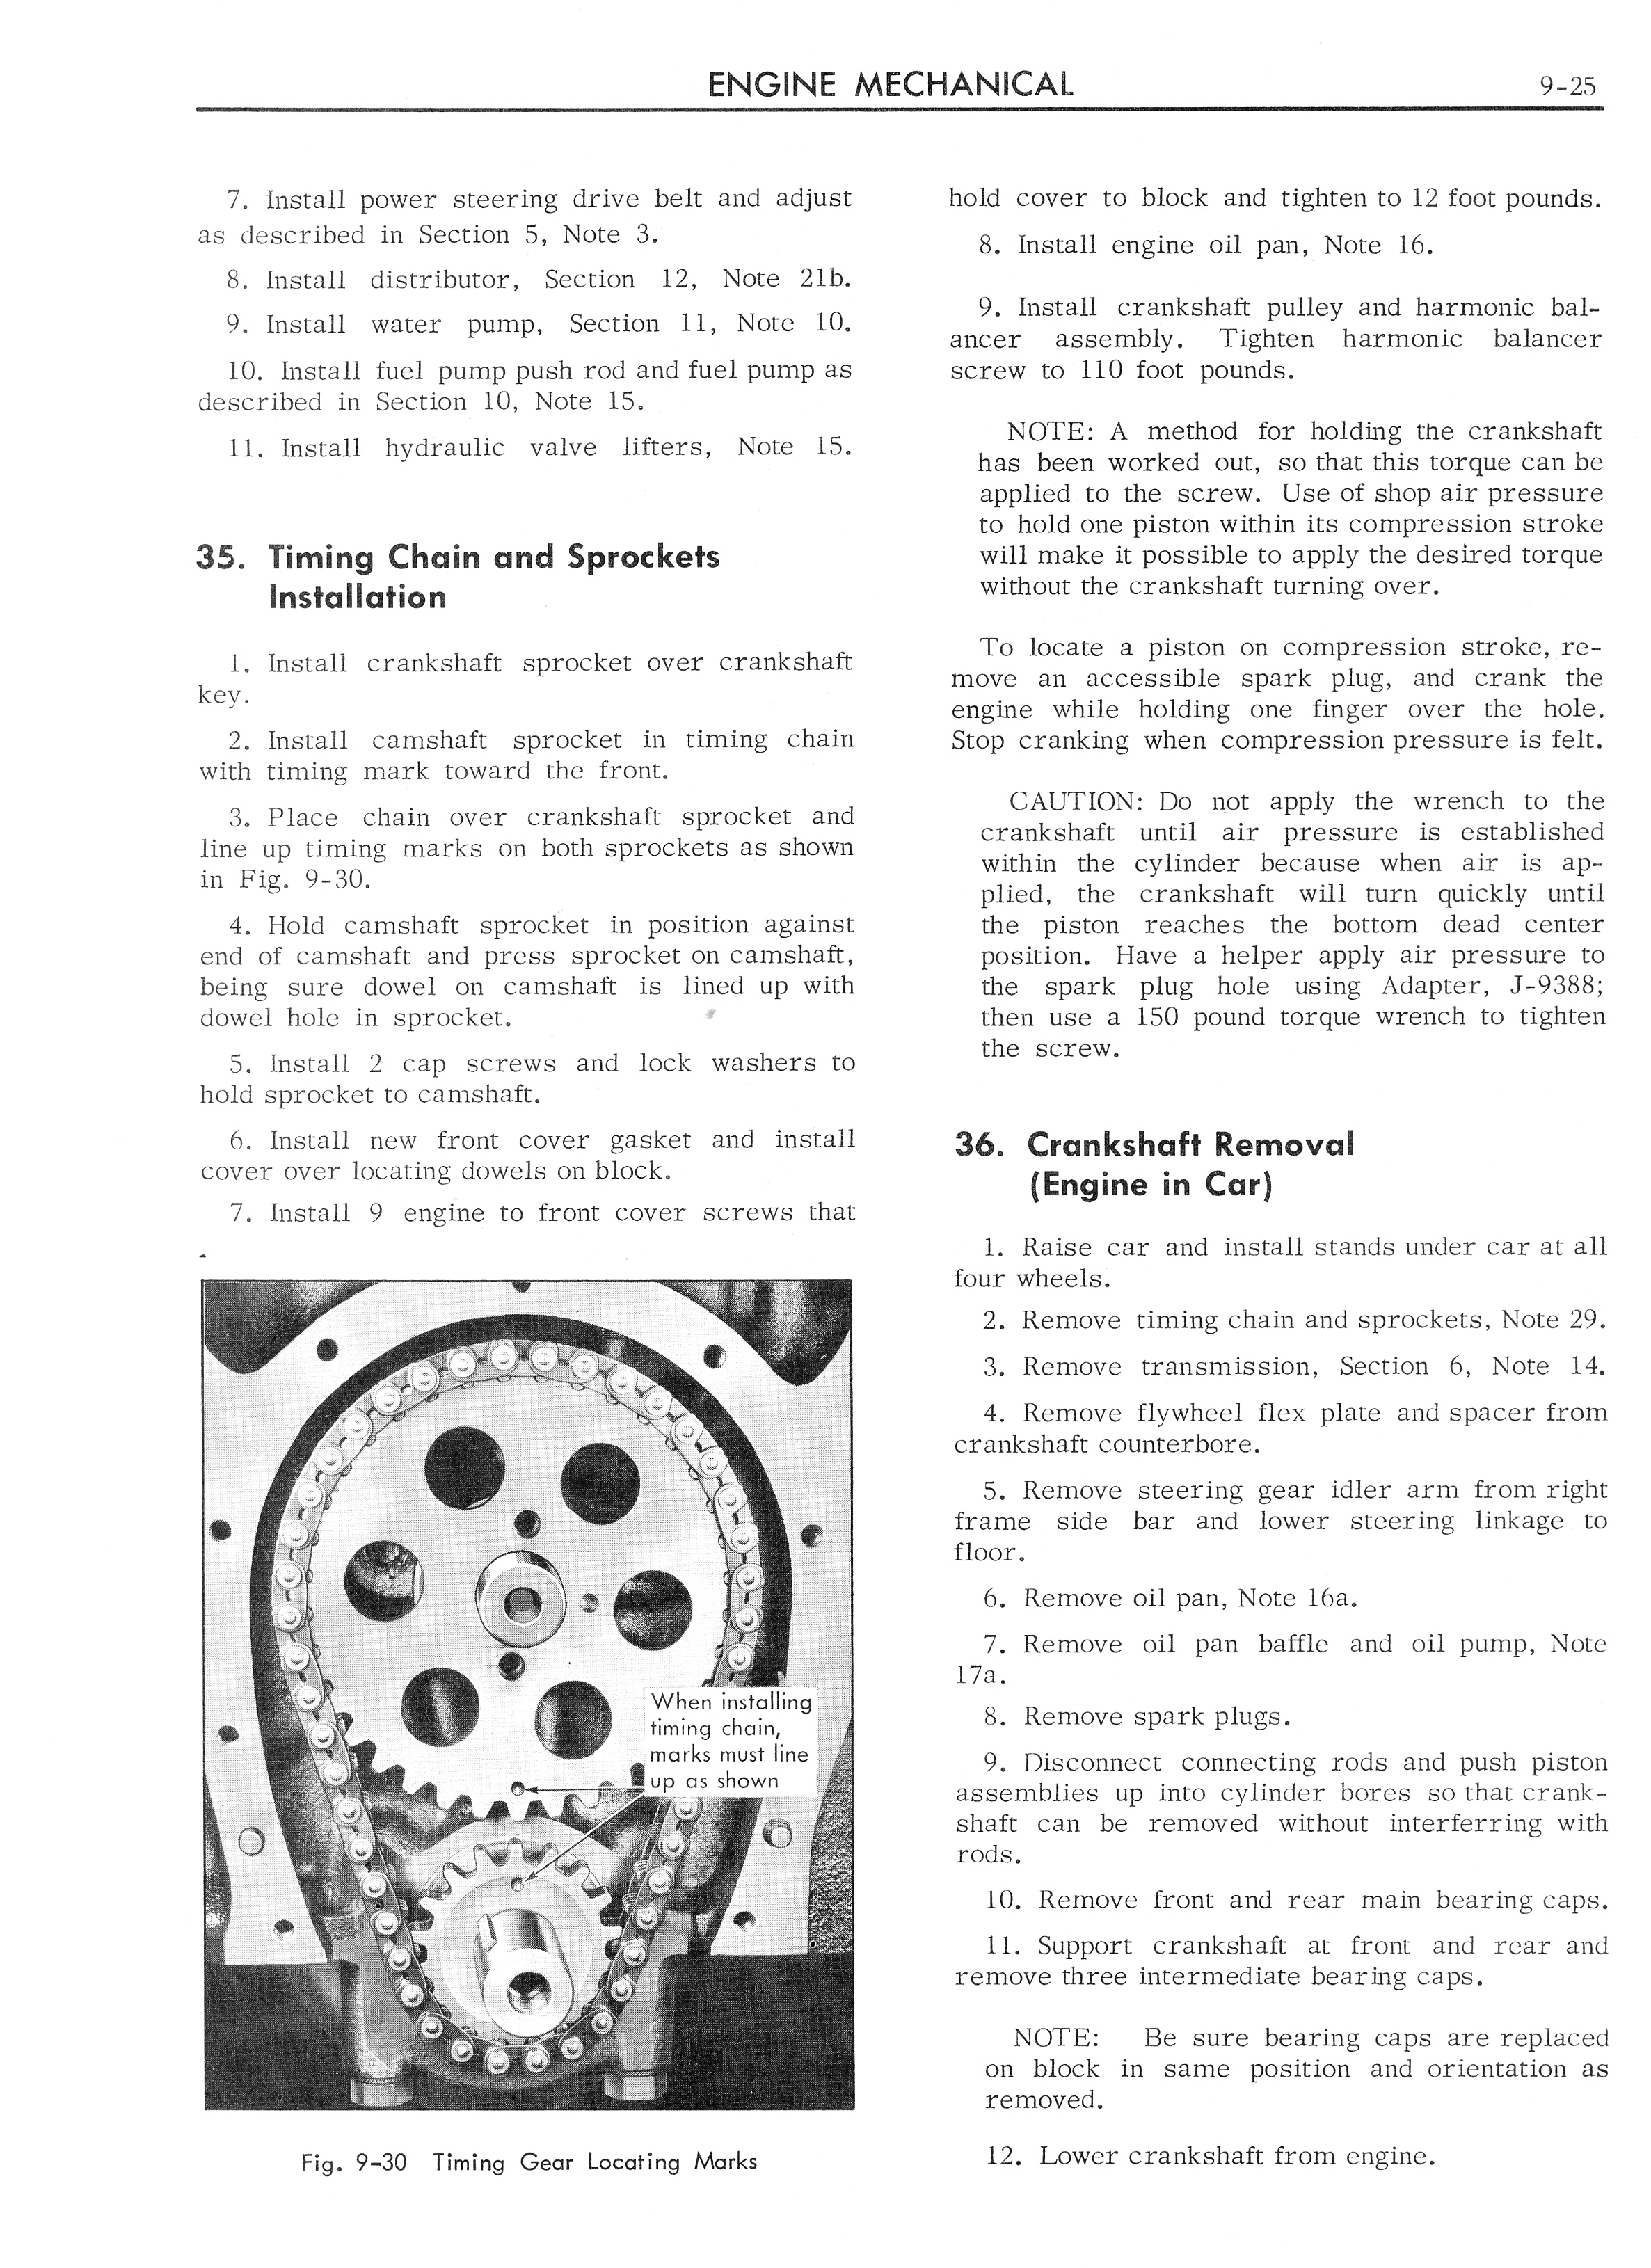 1962 Cadillac Shop Manual - Engine Mechanical Page 25 of 32